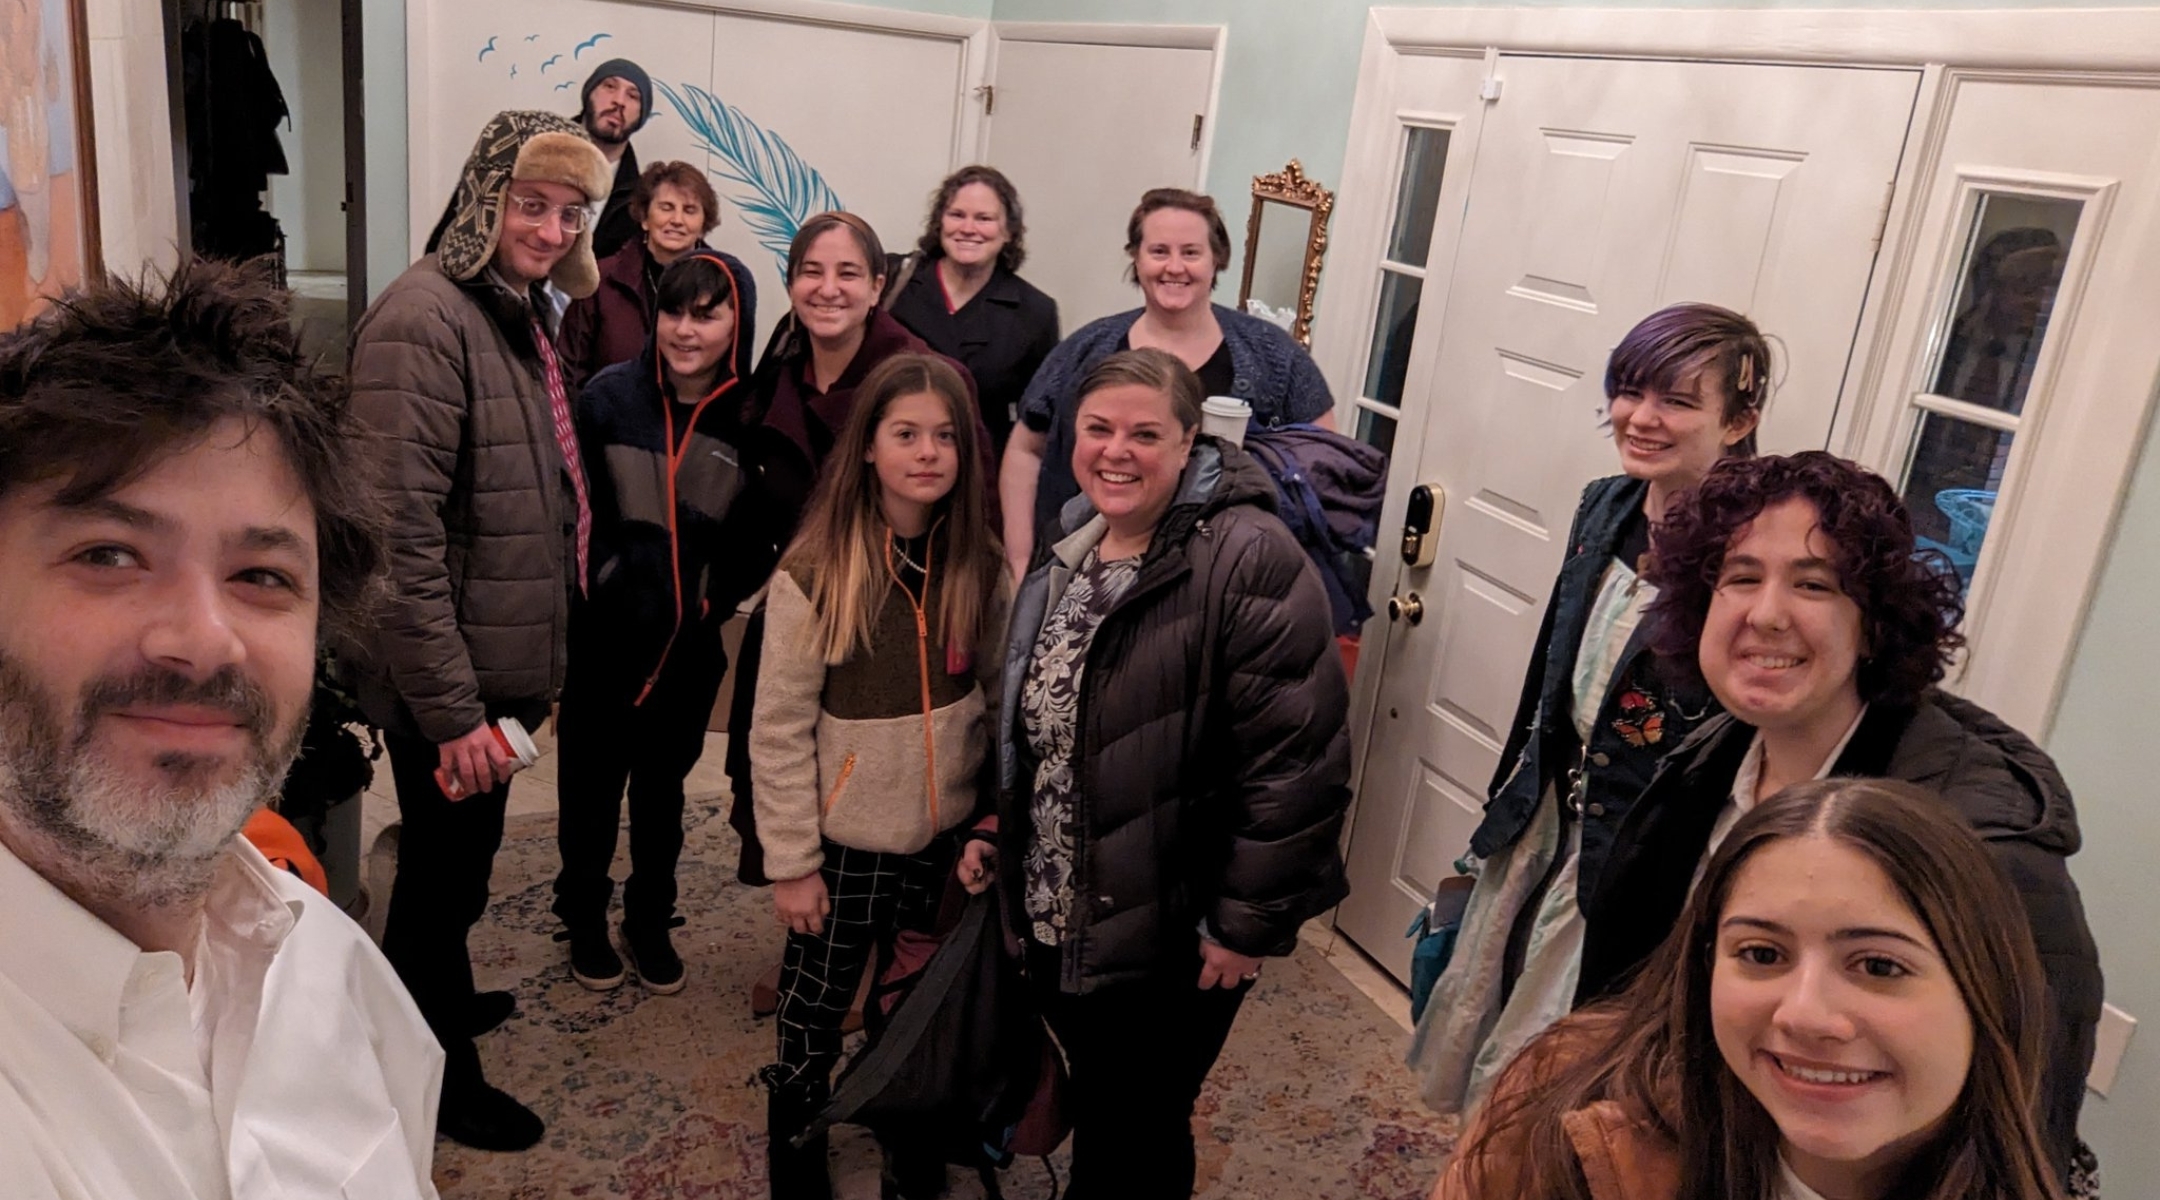 With only 25 hours of advance notice, the group going to testify in Jefferson City had to leave St. Louis at 5:30 am in order to make it on time. (Courtesy of Daniel Bogard)